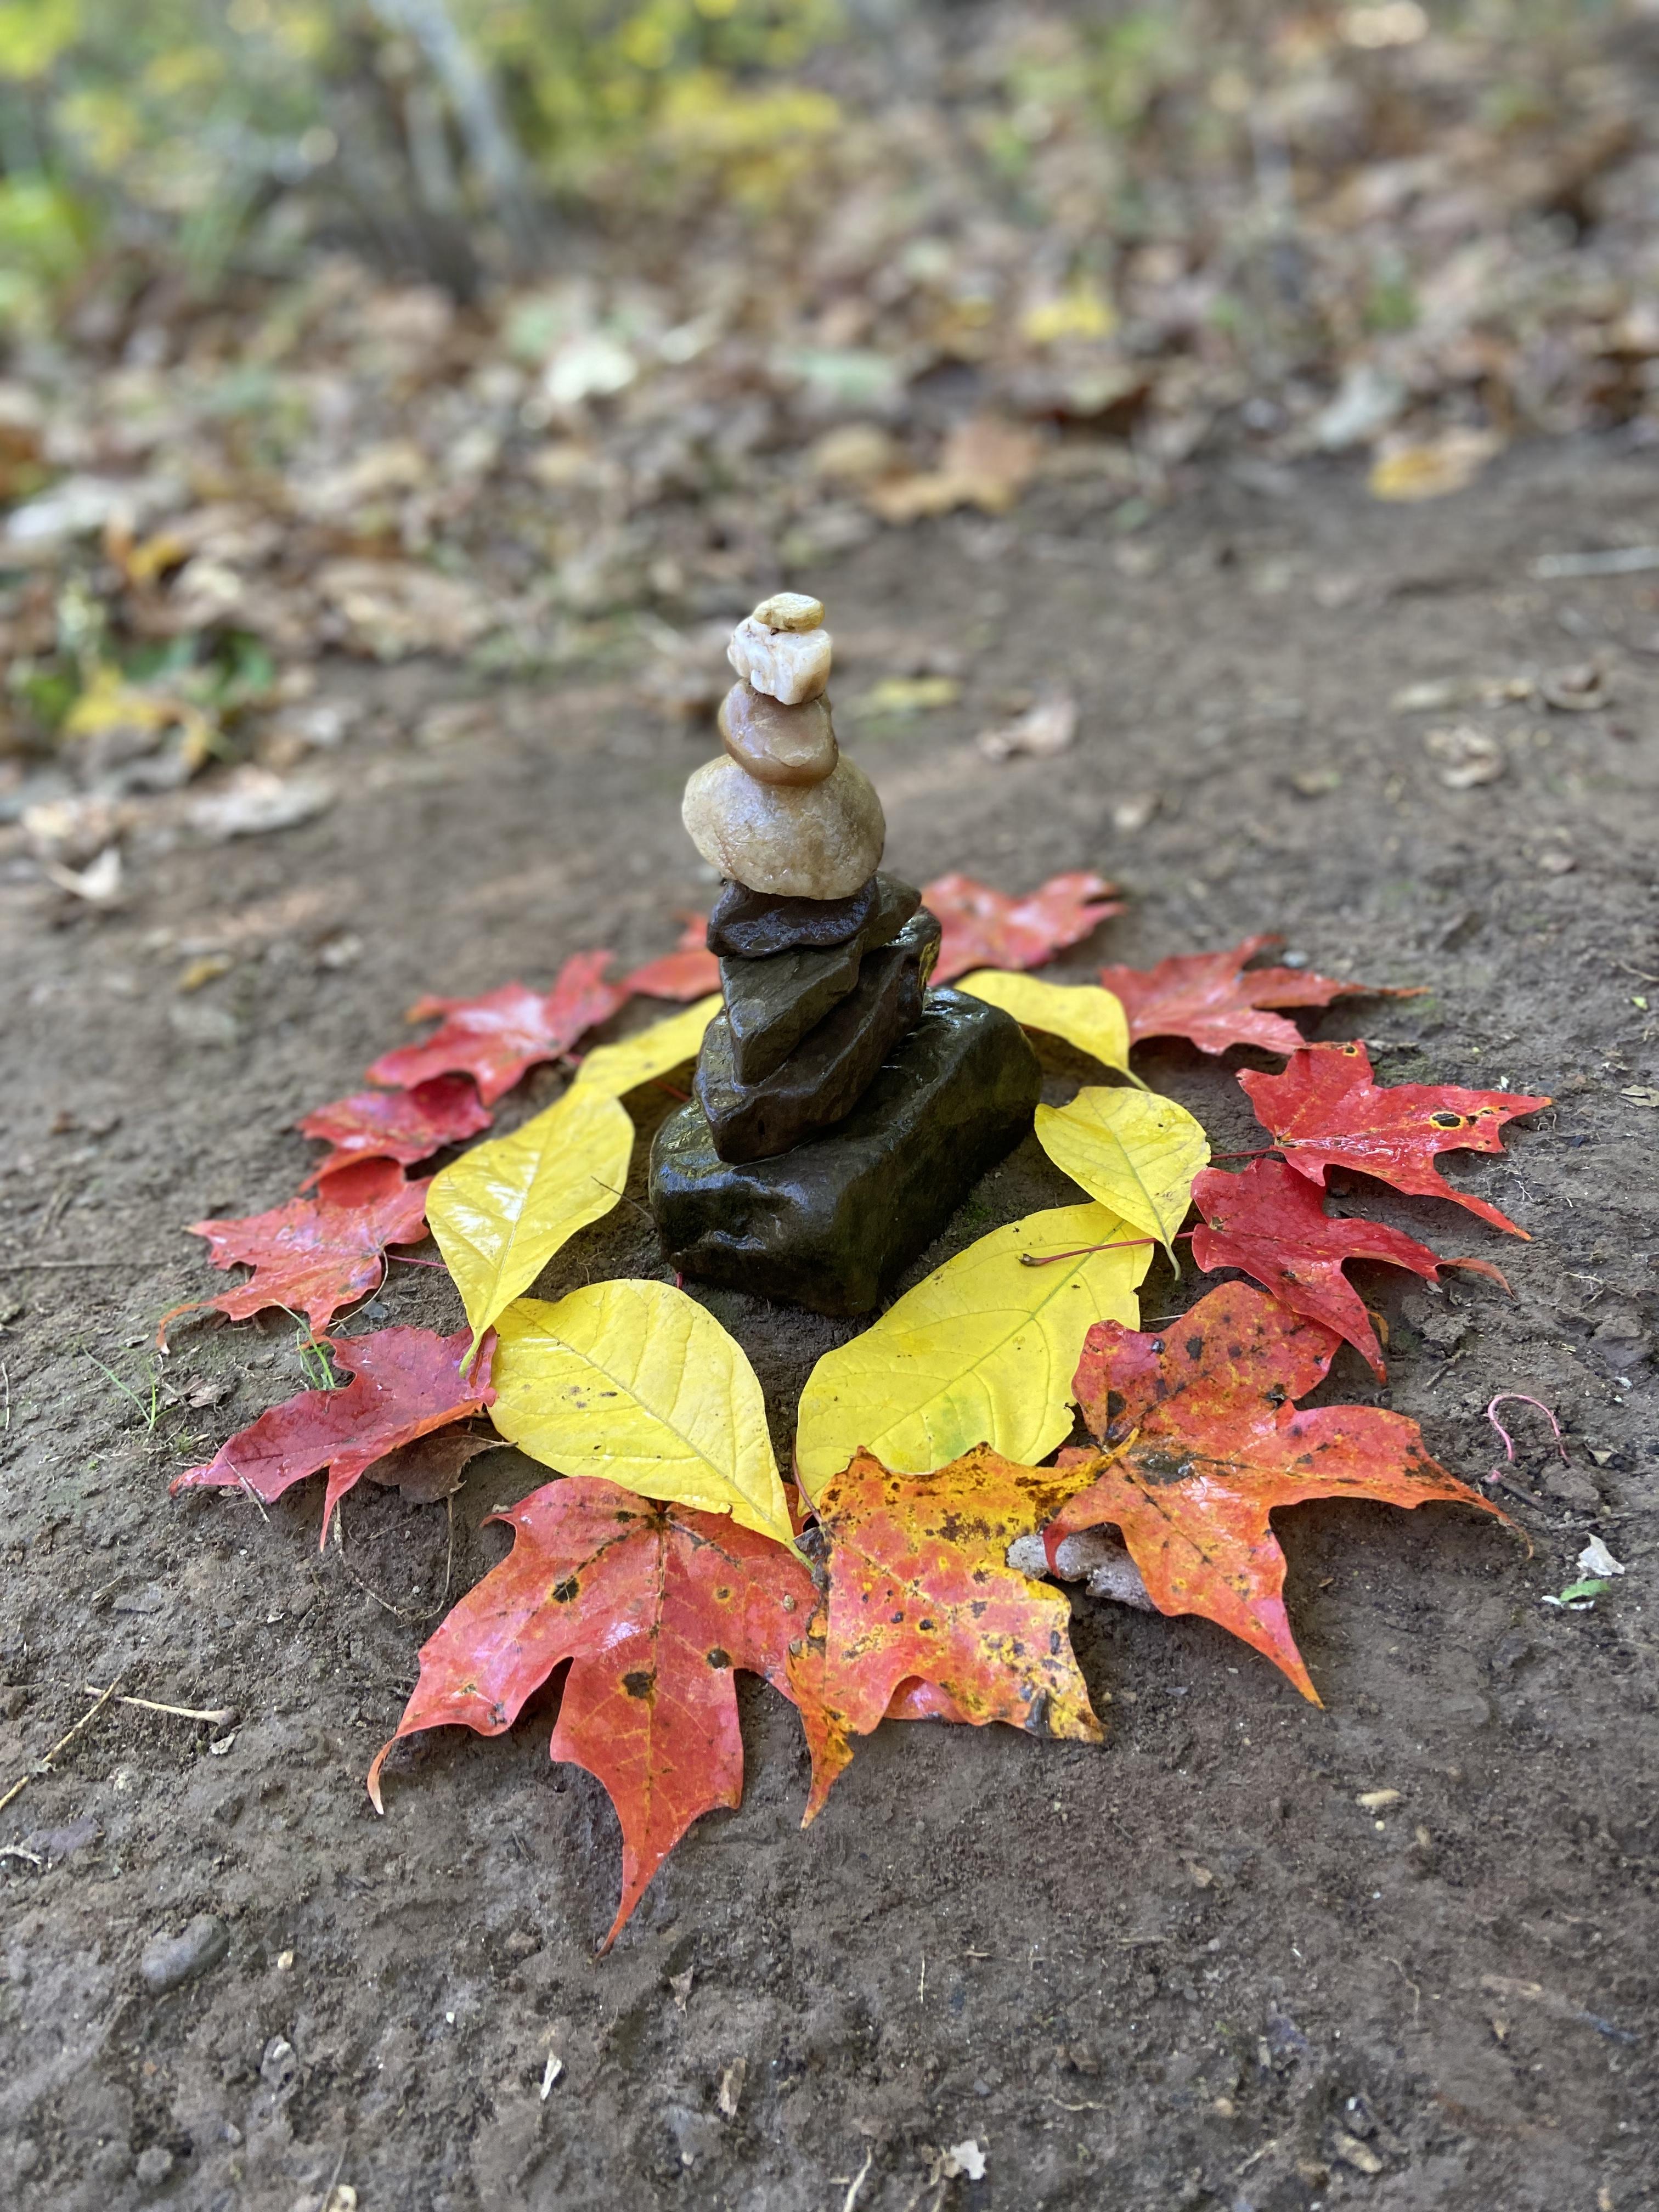 Middle School Art Explores Outdoors with Environmental Sculpture Project